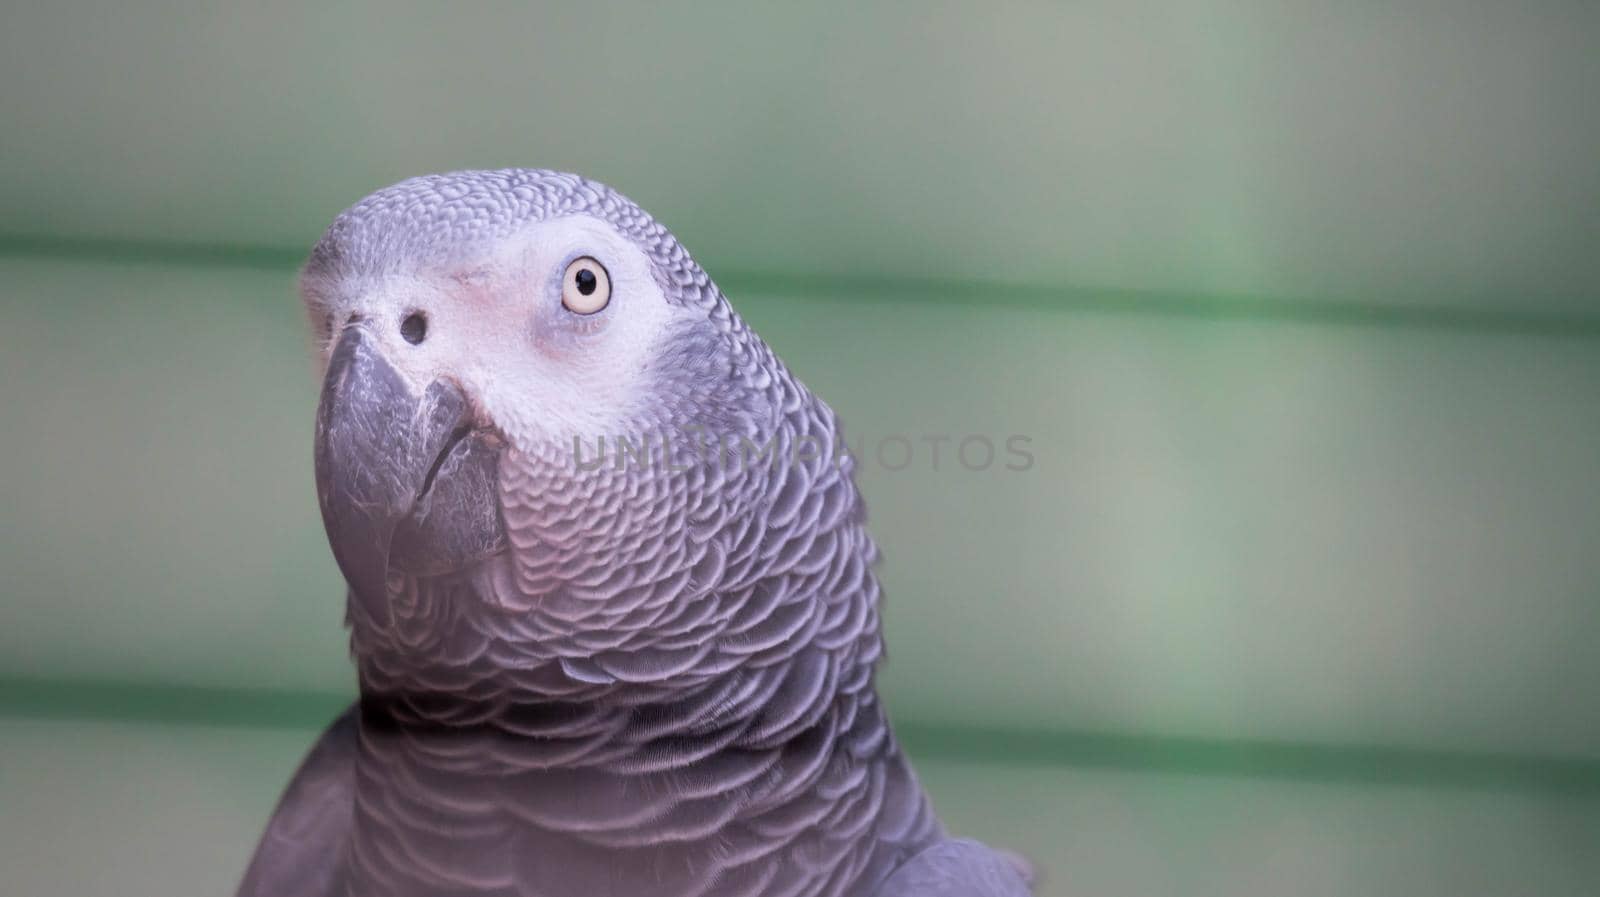 African Grey Parrot - Psittacus erithacus in a green blurry background by billroque